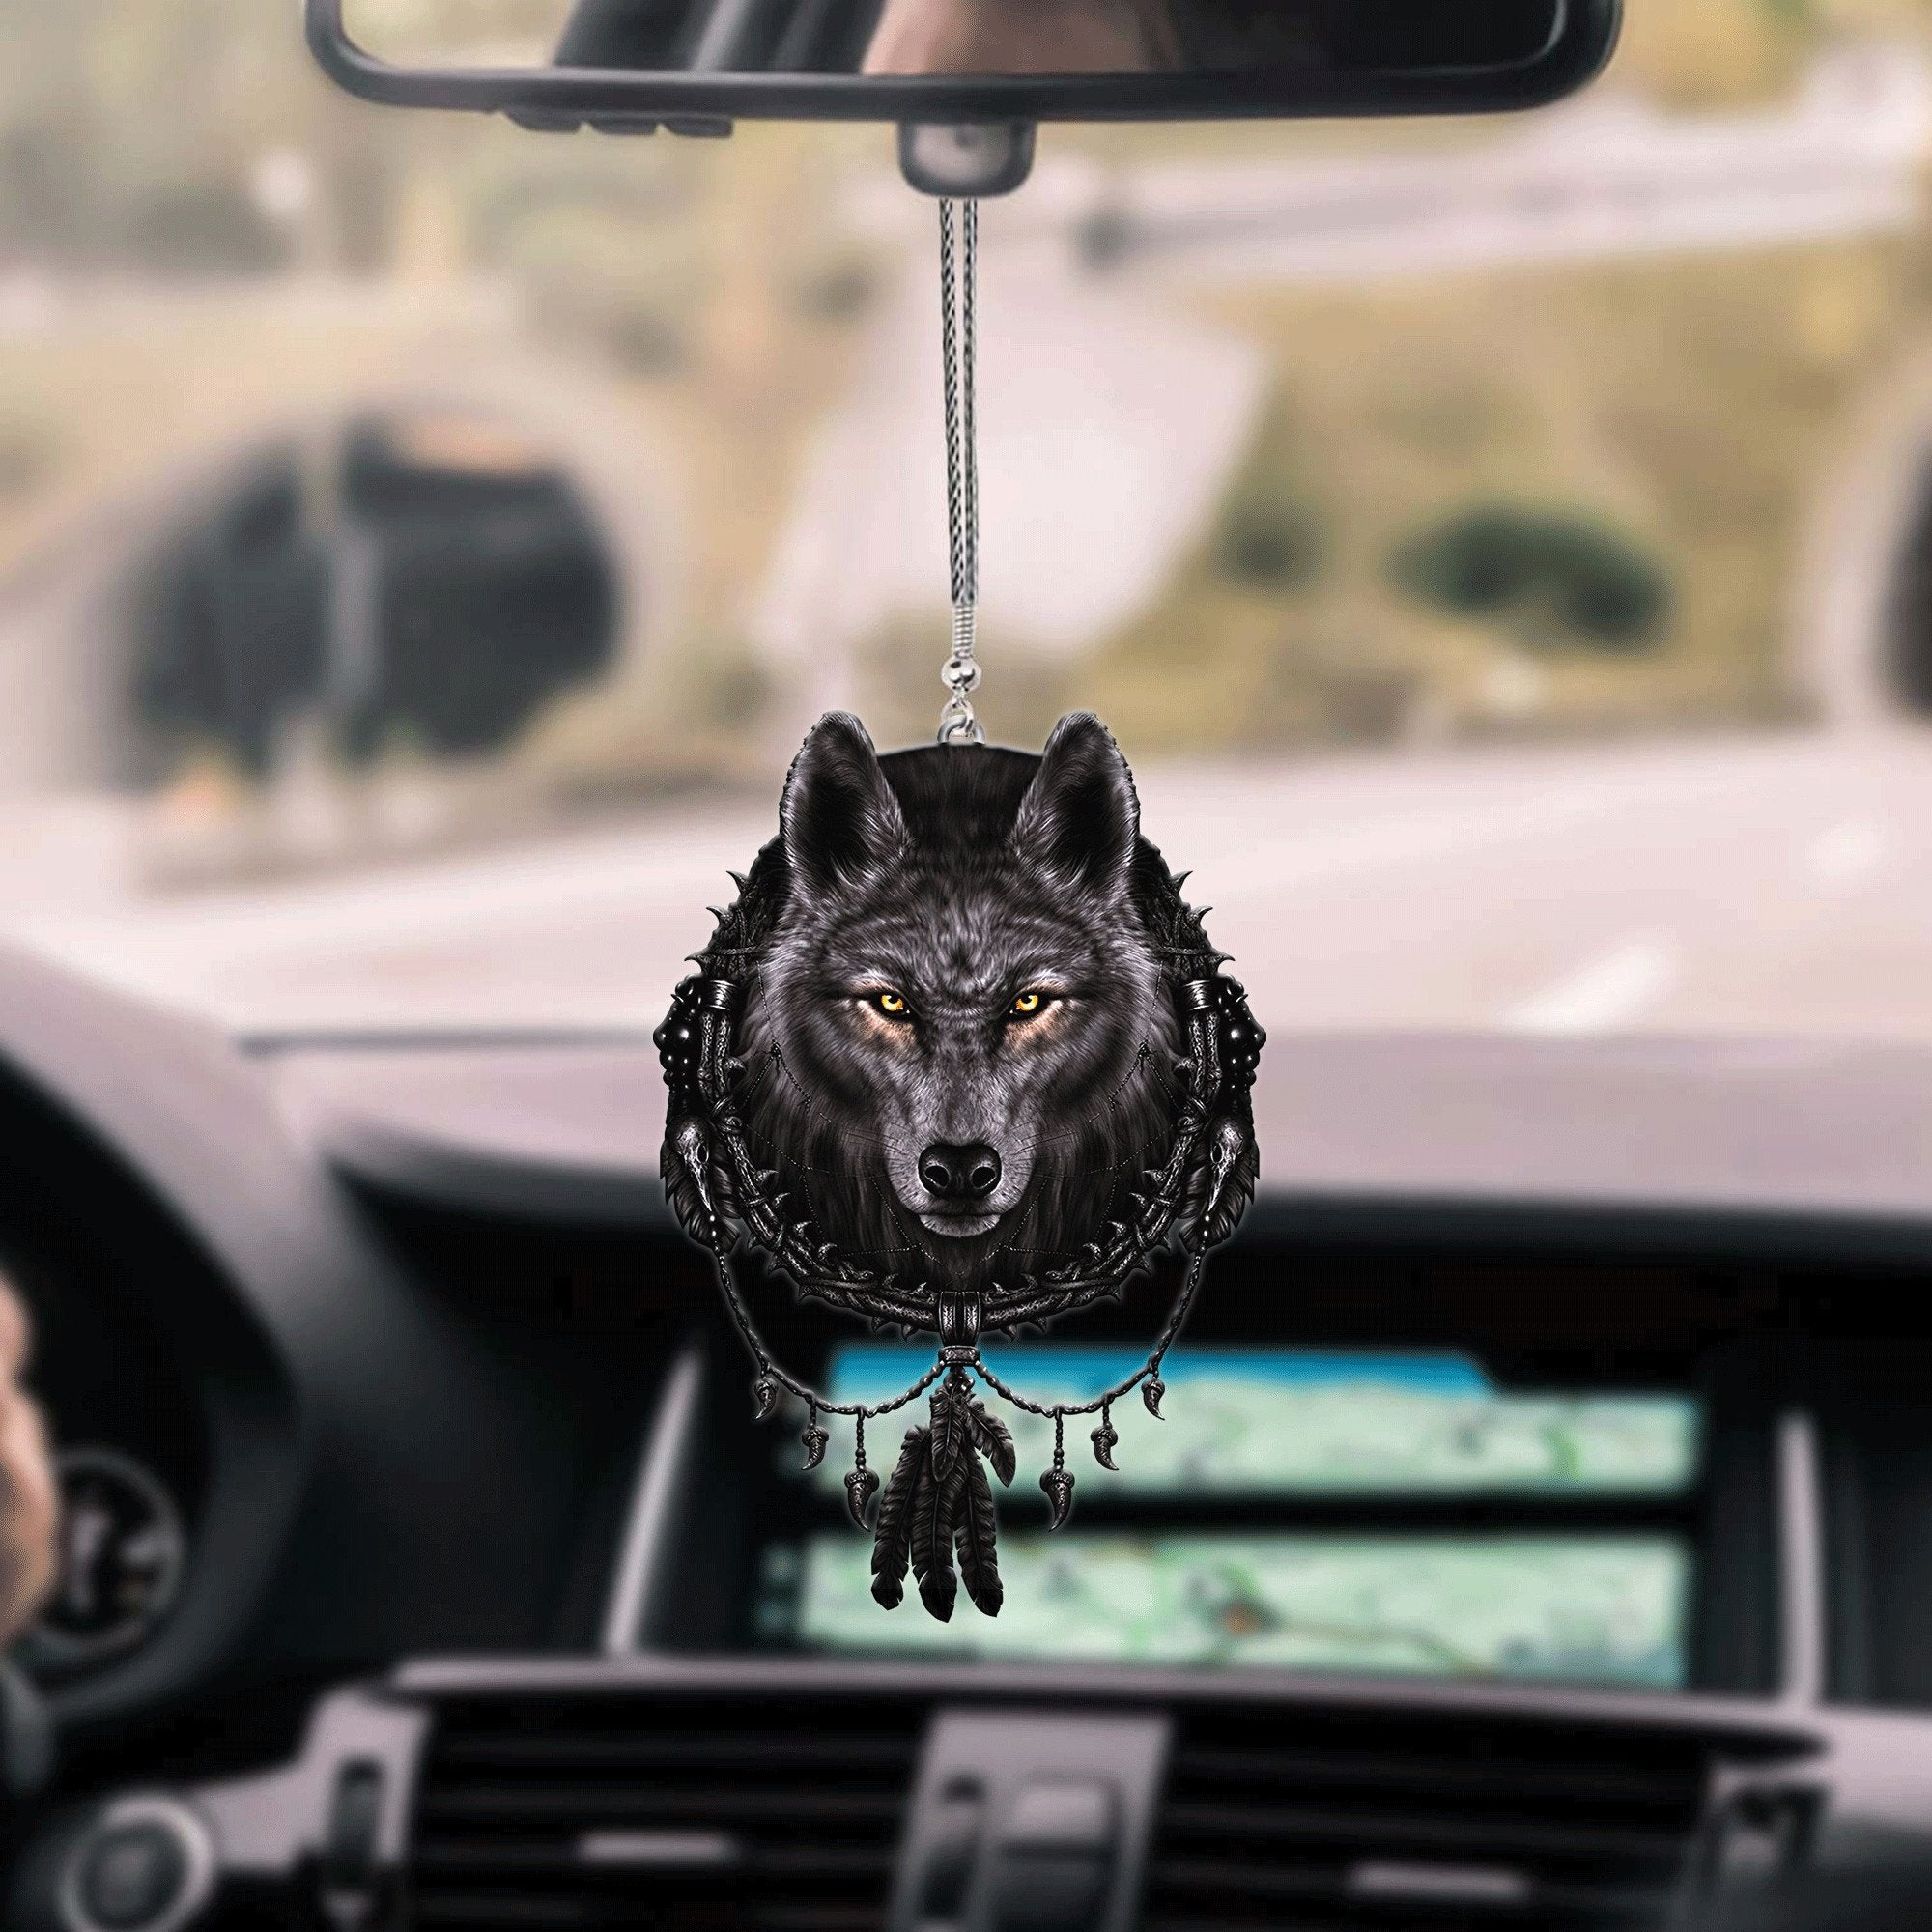 Native American Ornament For His Car/ Native American Hanging Decoration For Auto